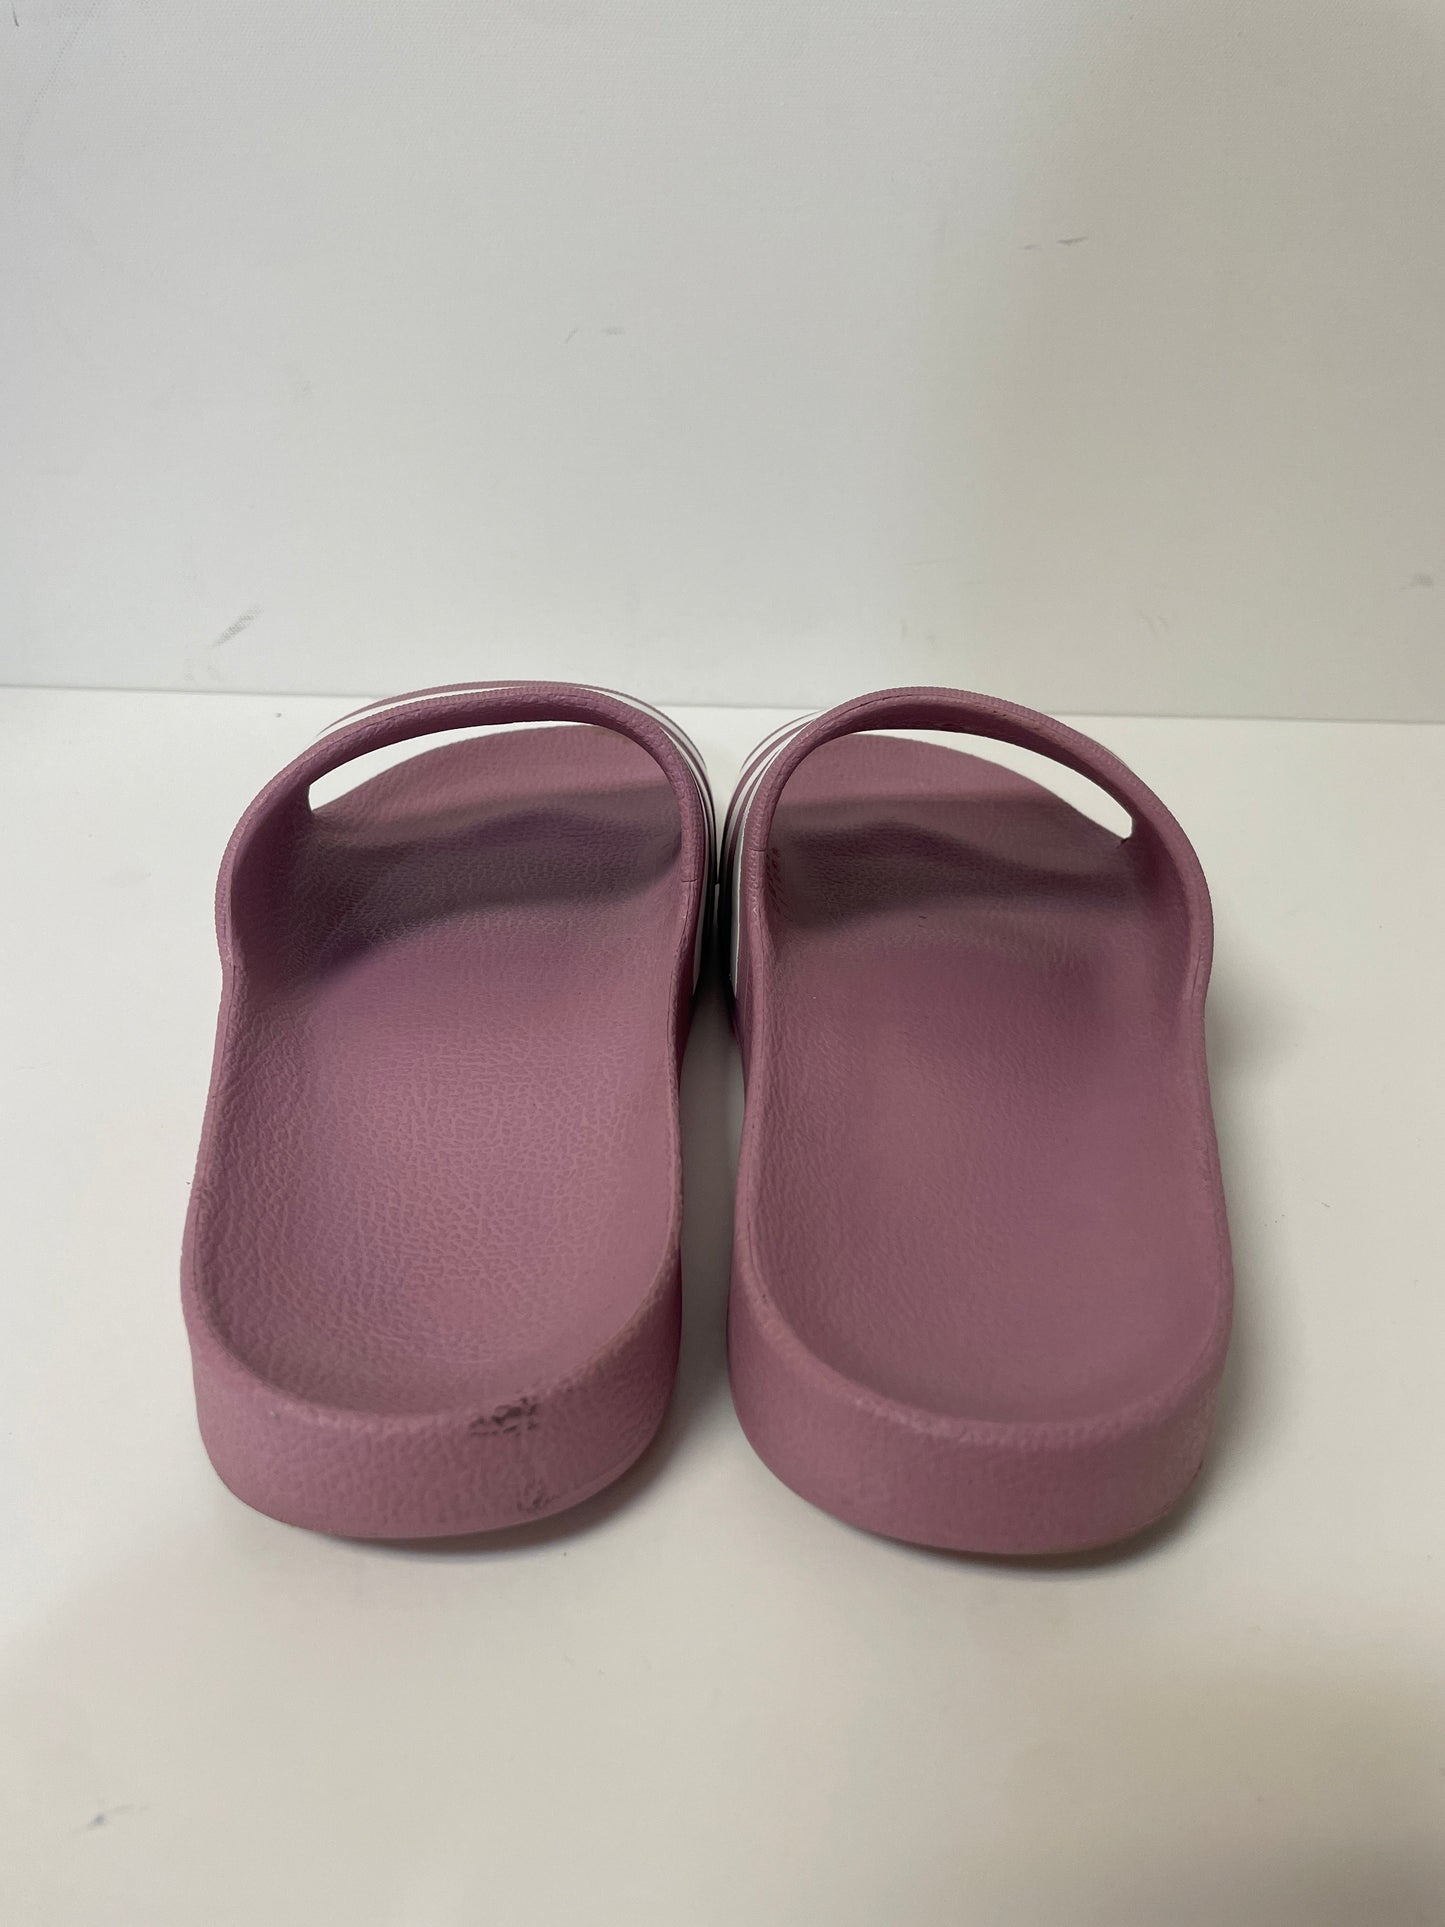 Sandals Flats By Adidas  Size: 6